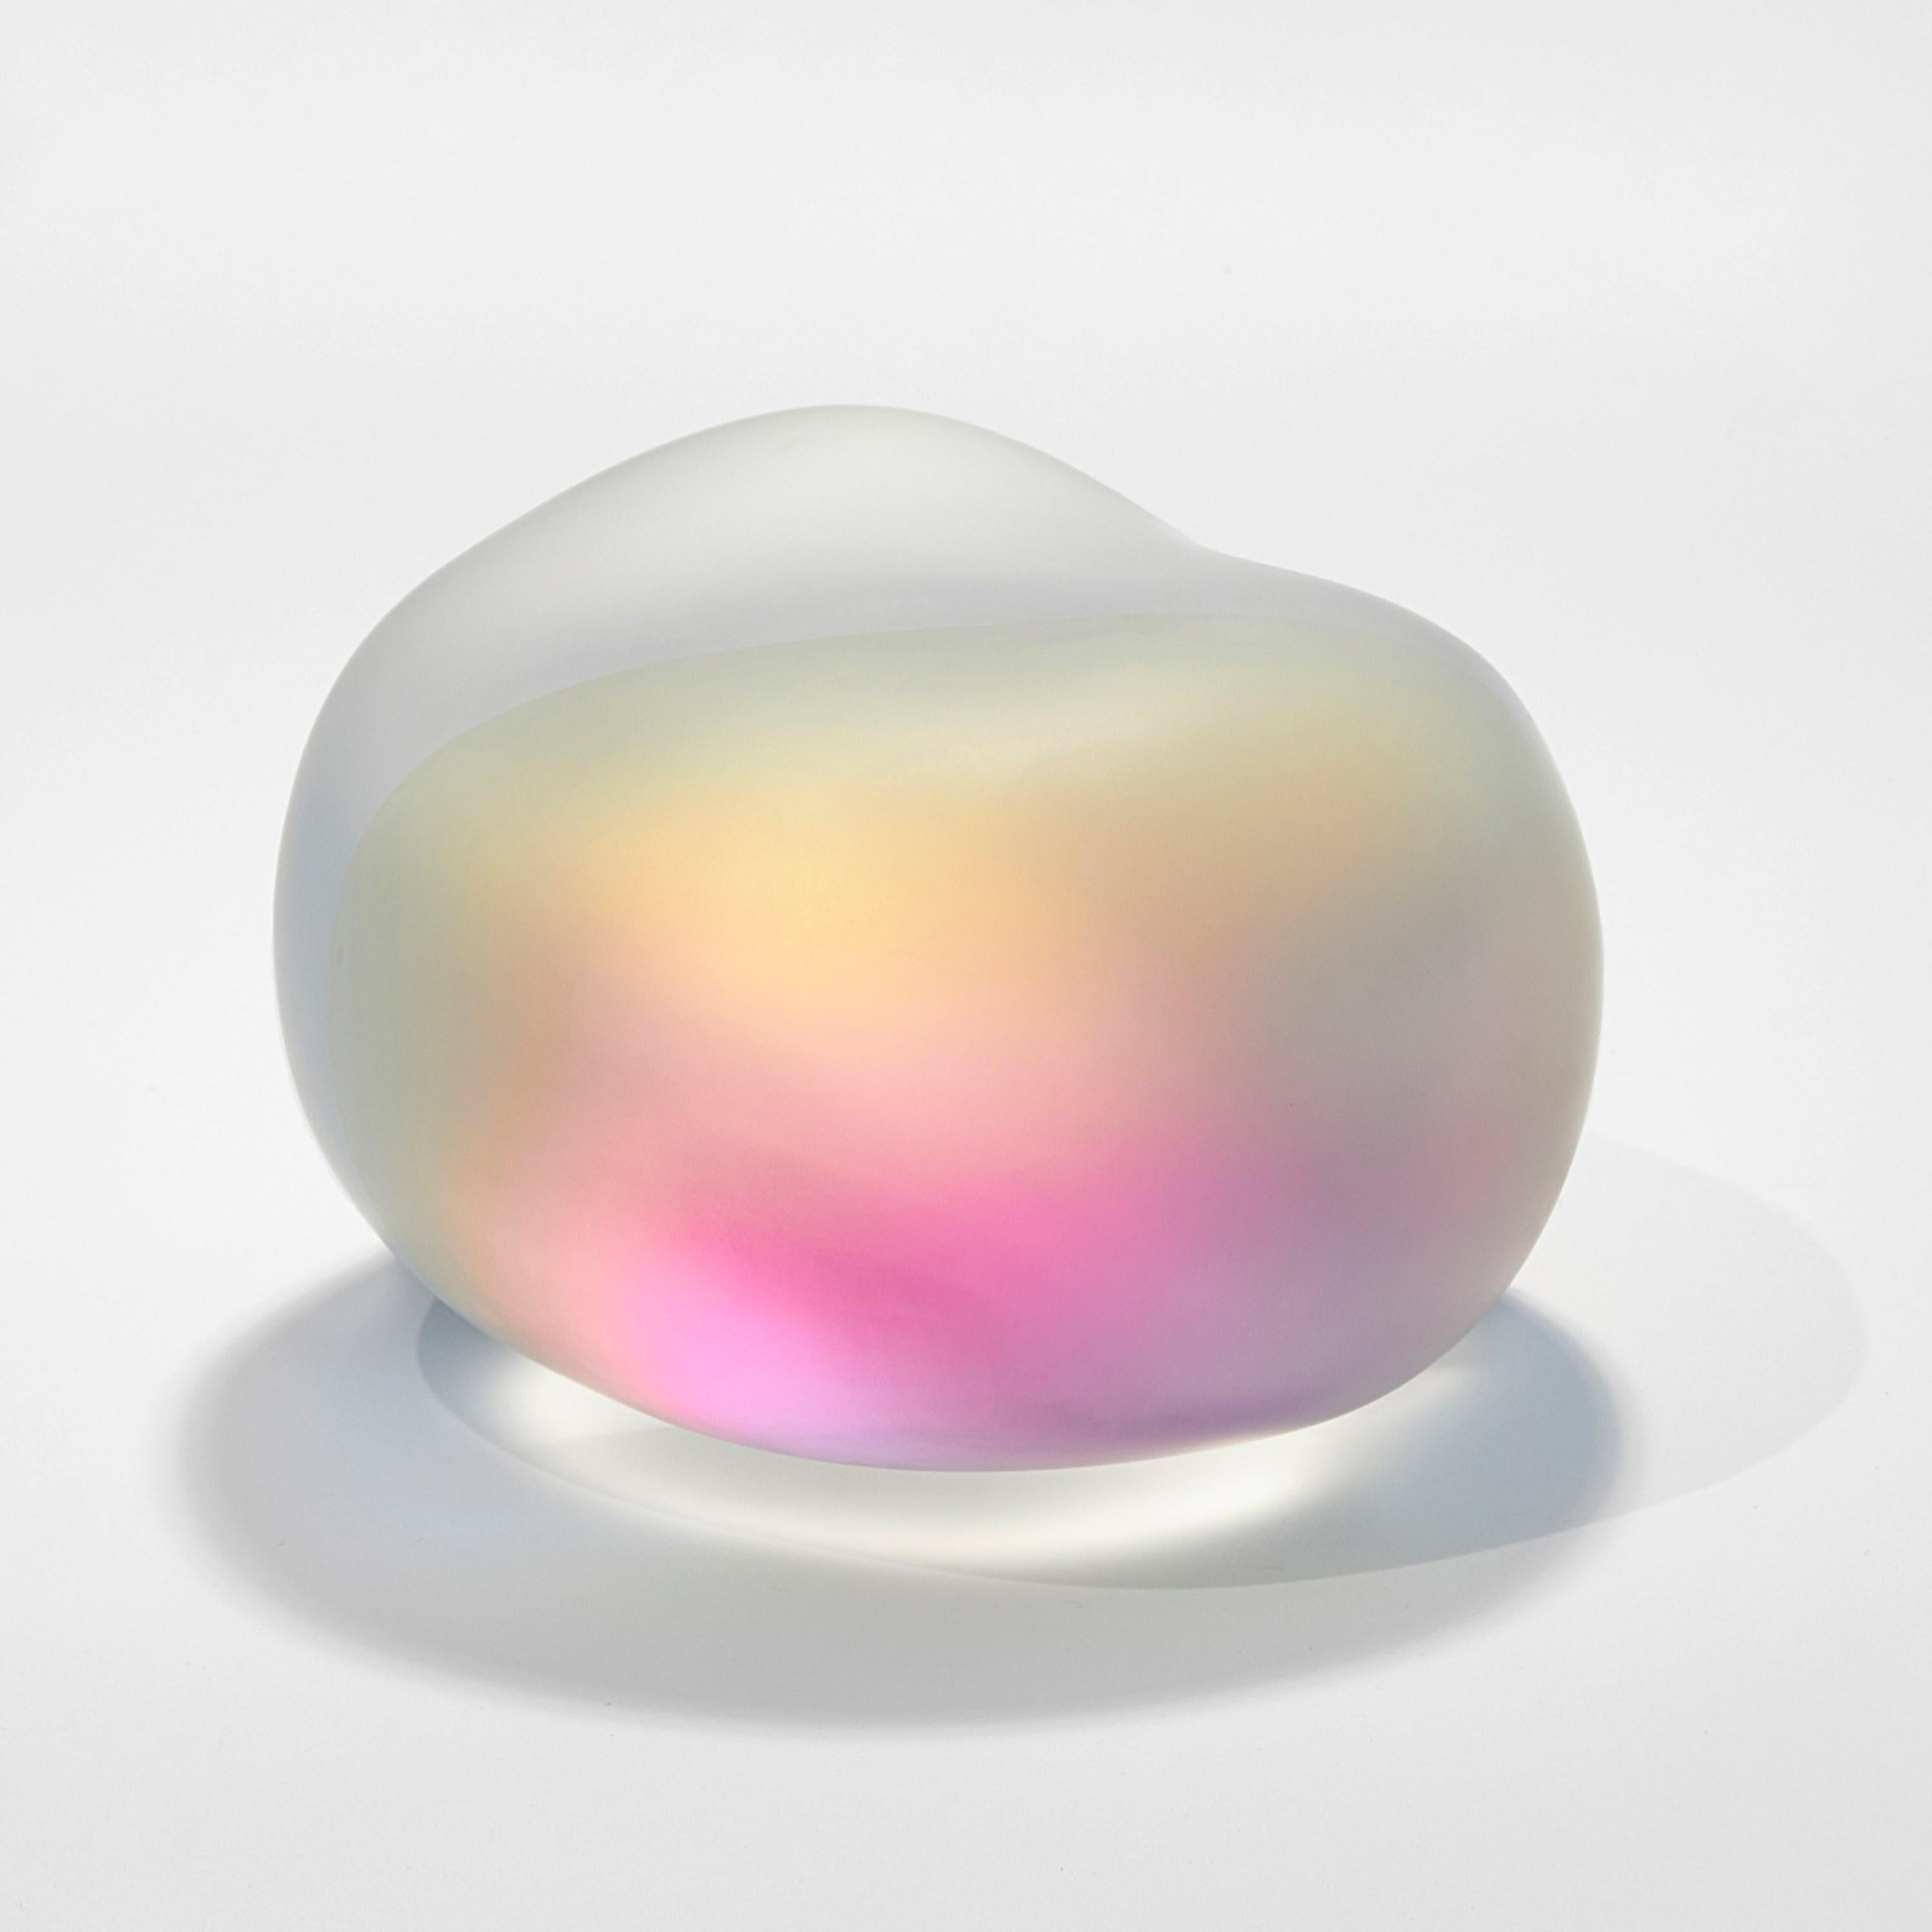 Organic Modern Moon-rock 011, clear glass sculptural rock with iridescent colours by Jon Lewis